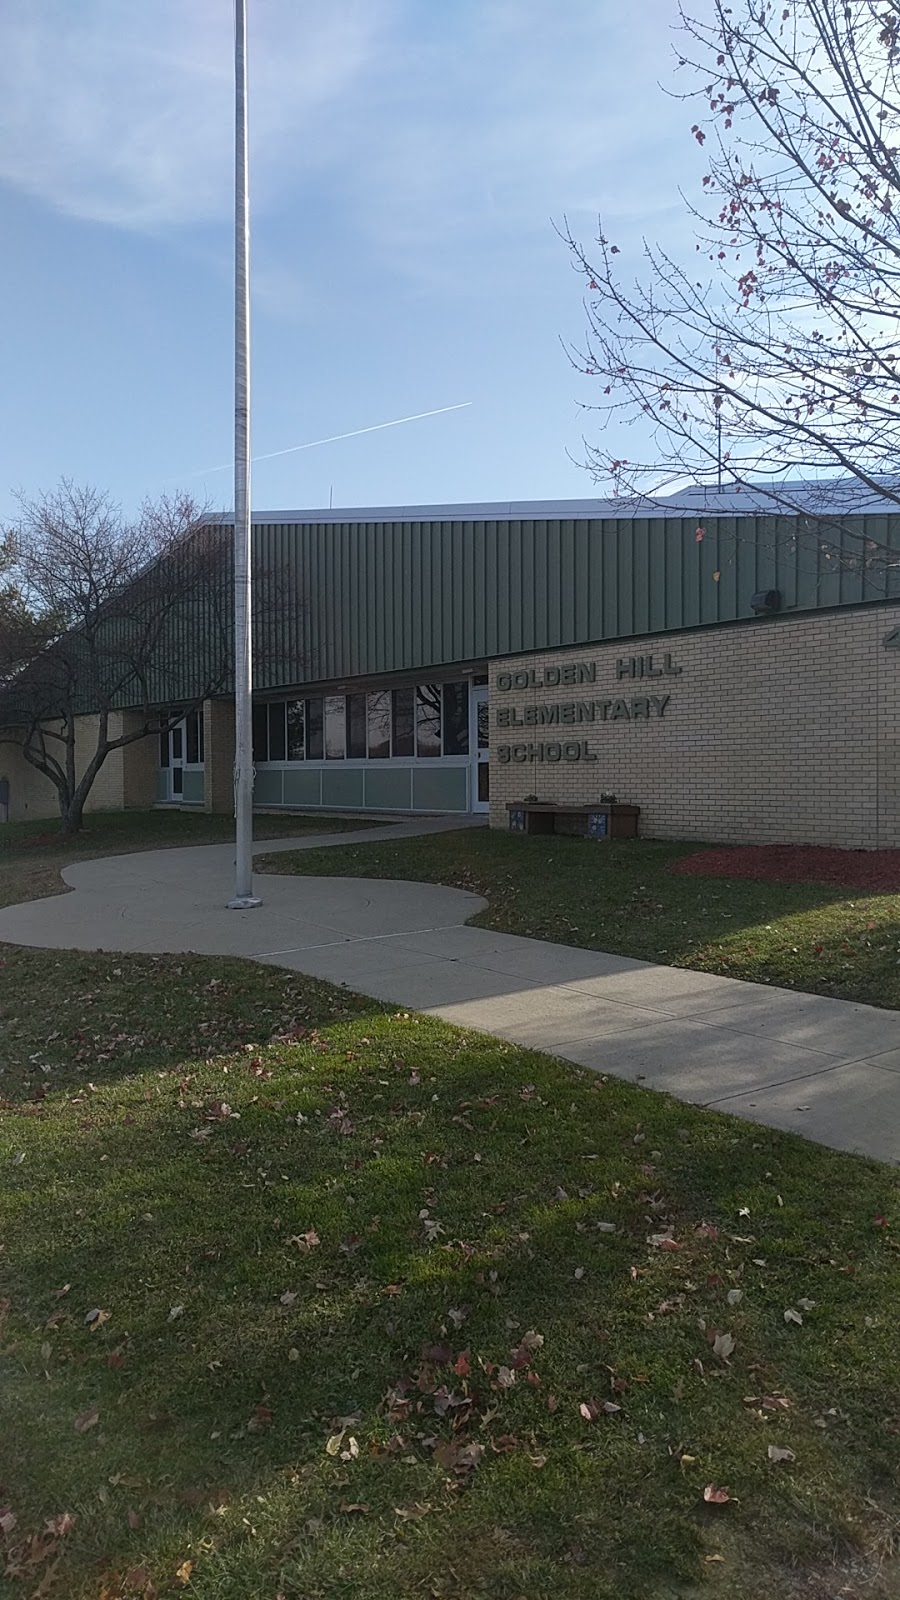 Golden Hill Elementary School | 478 Round Hill Rd, Florida, NY 10921 | Phone: (845) 651-3095